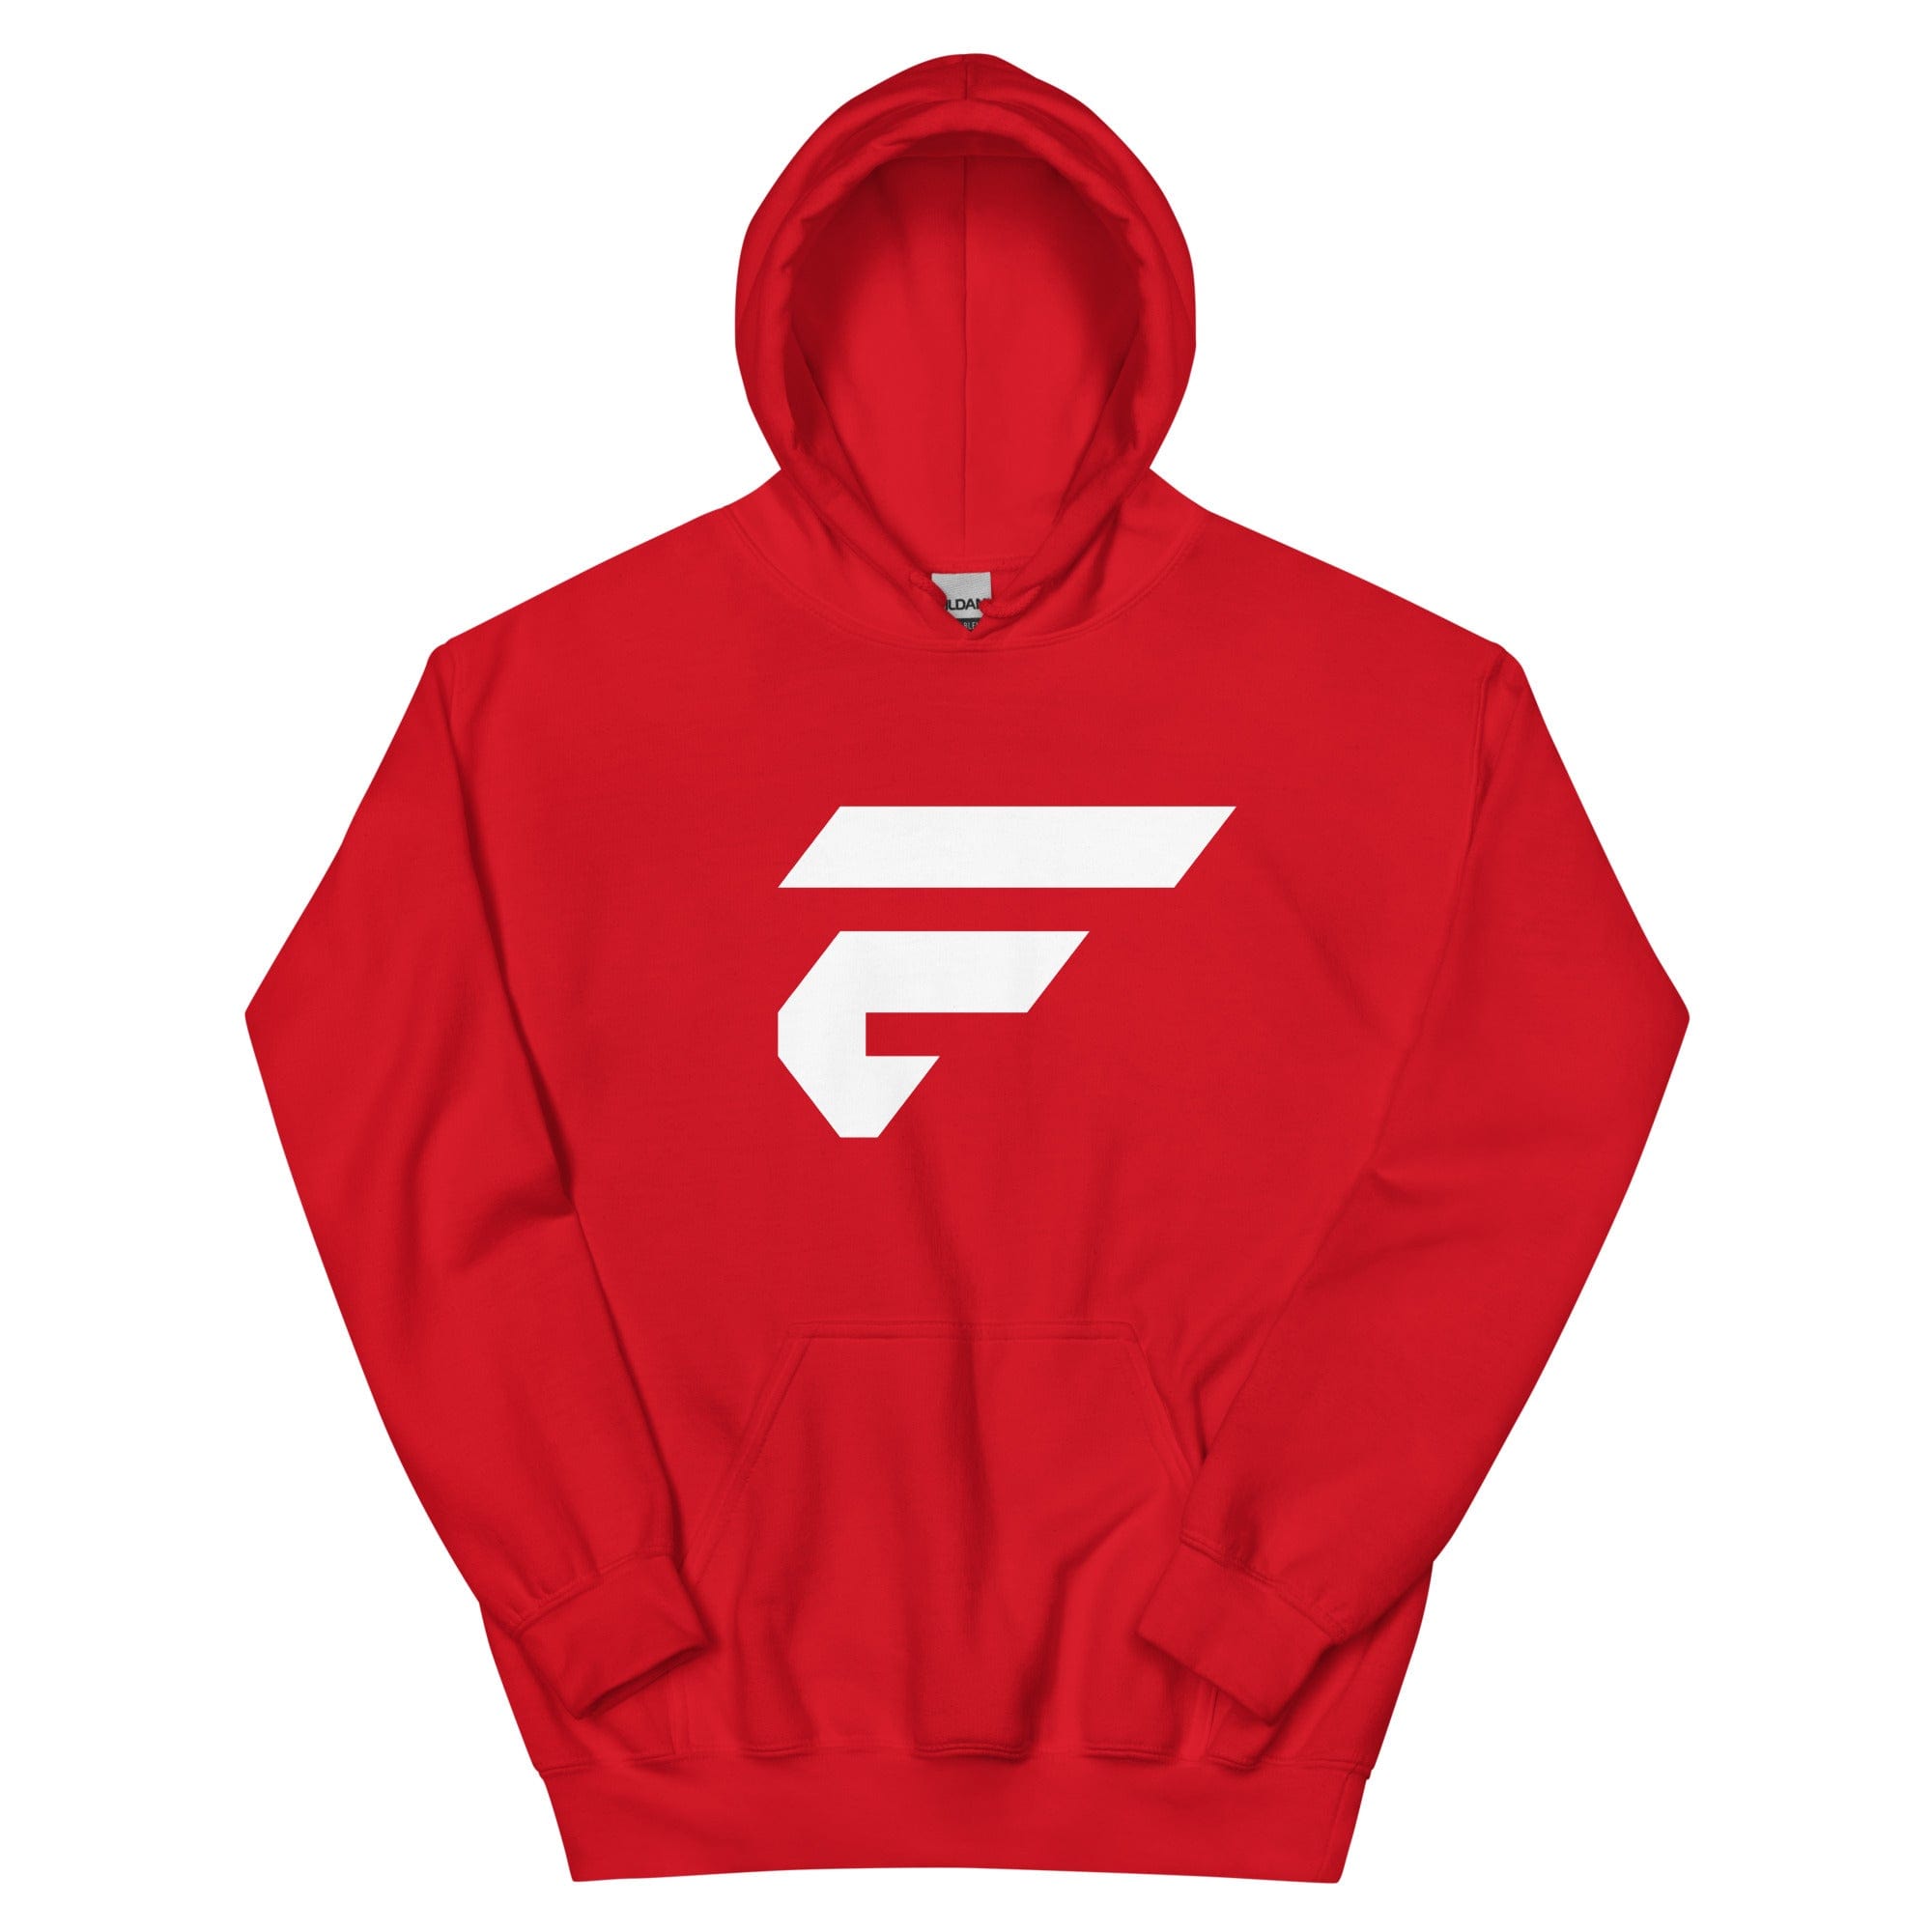 Red unisex cotton hoodie with Fire Cornhole F logo in white